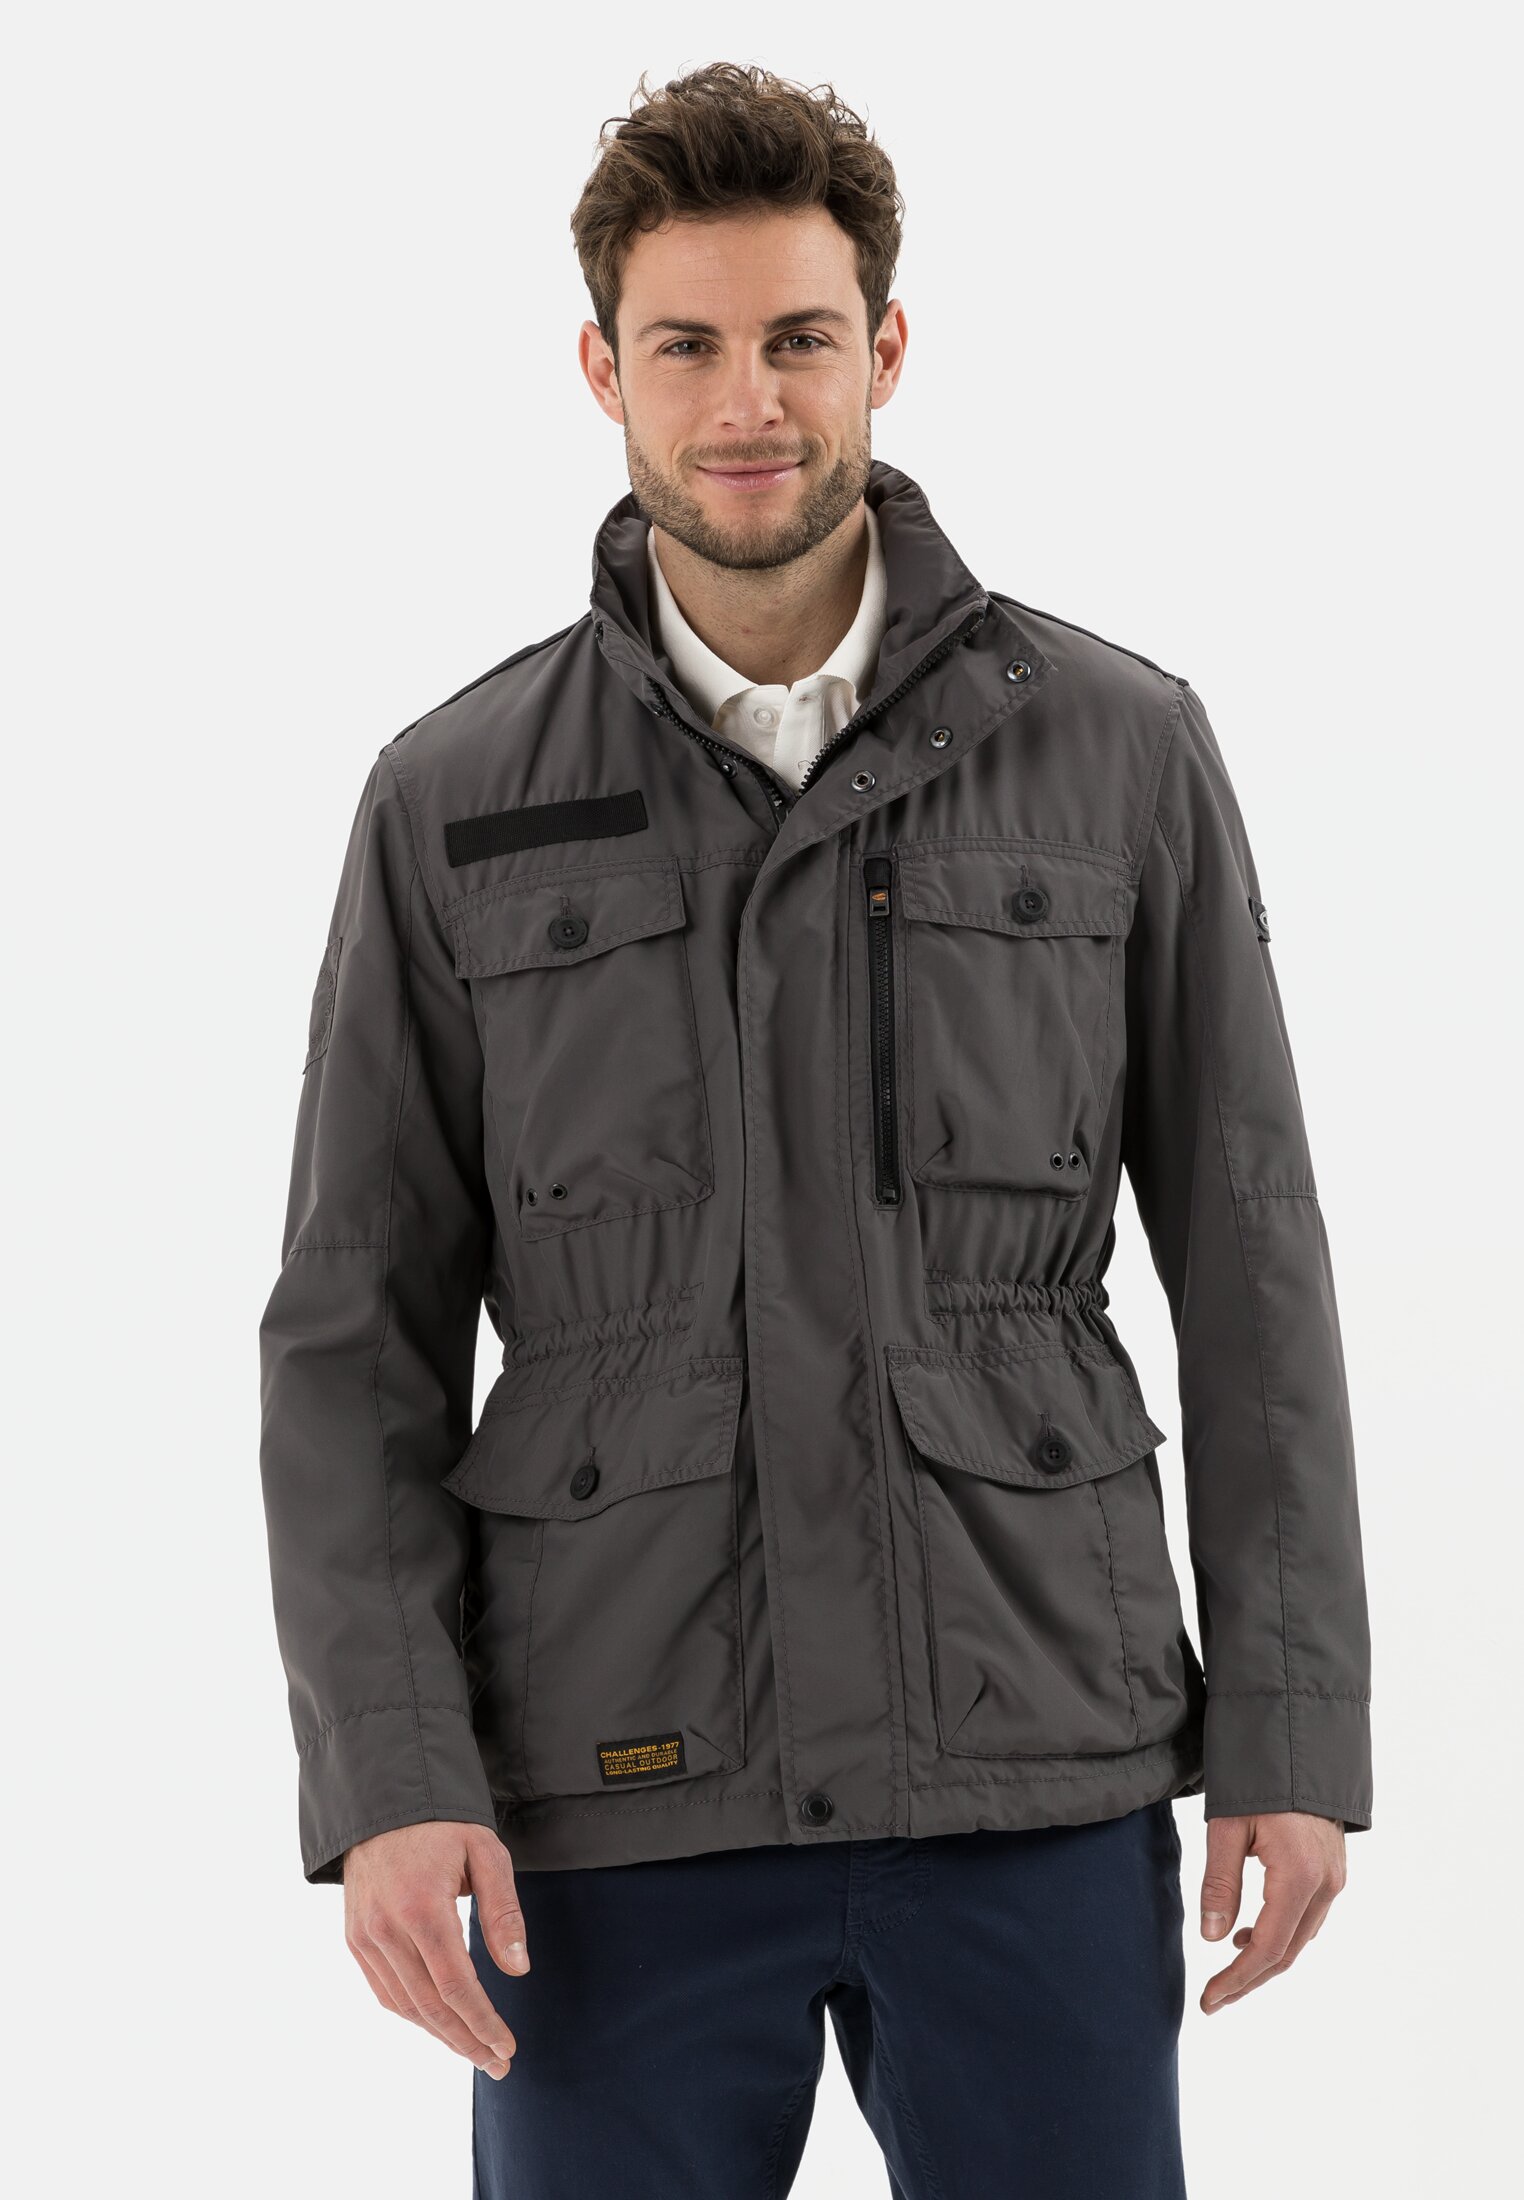 Camel Active Multi-Pocket Jacket with recycled Polyester